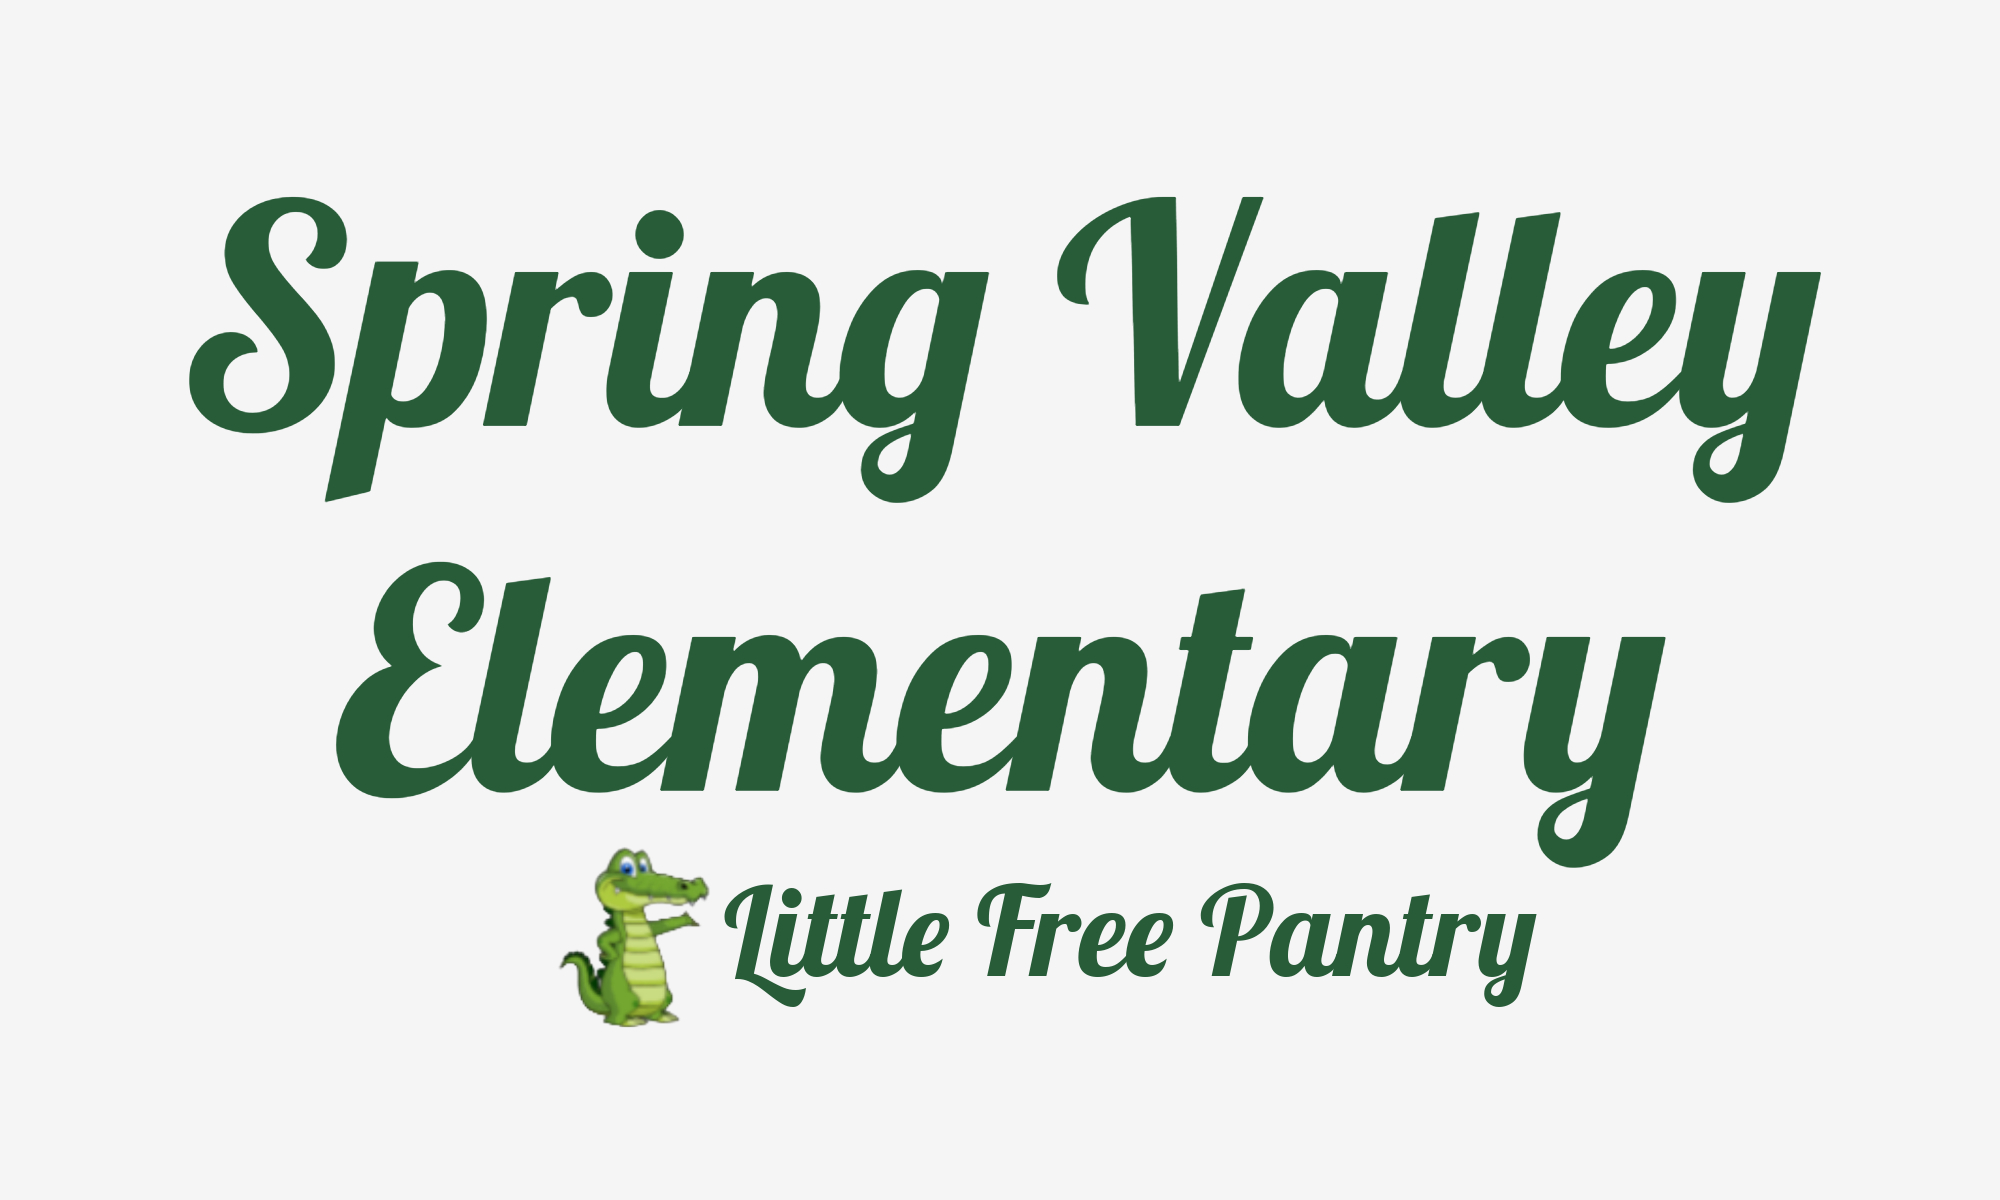 Spring Valley Elementary Little Free Pantry